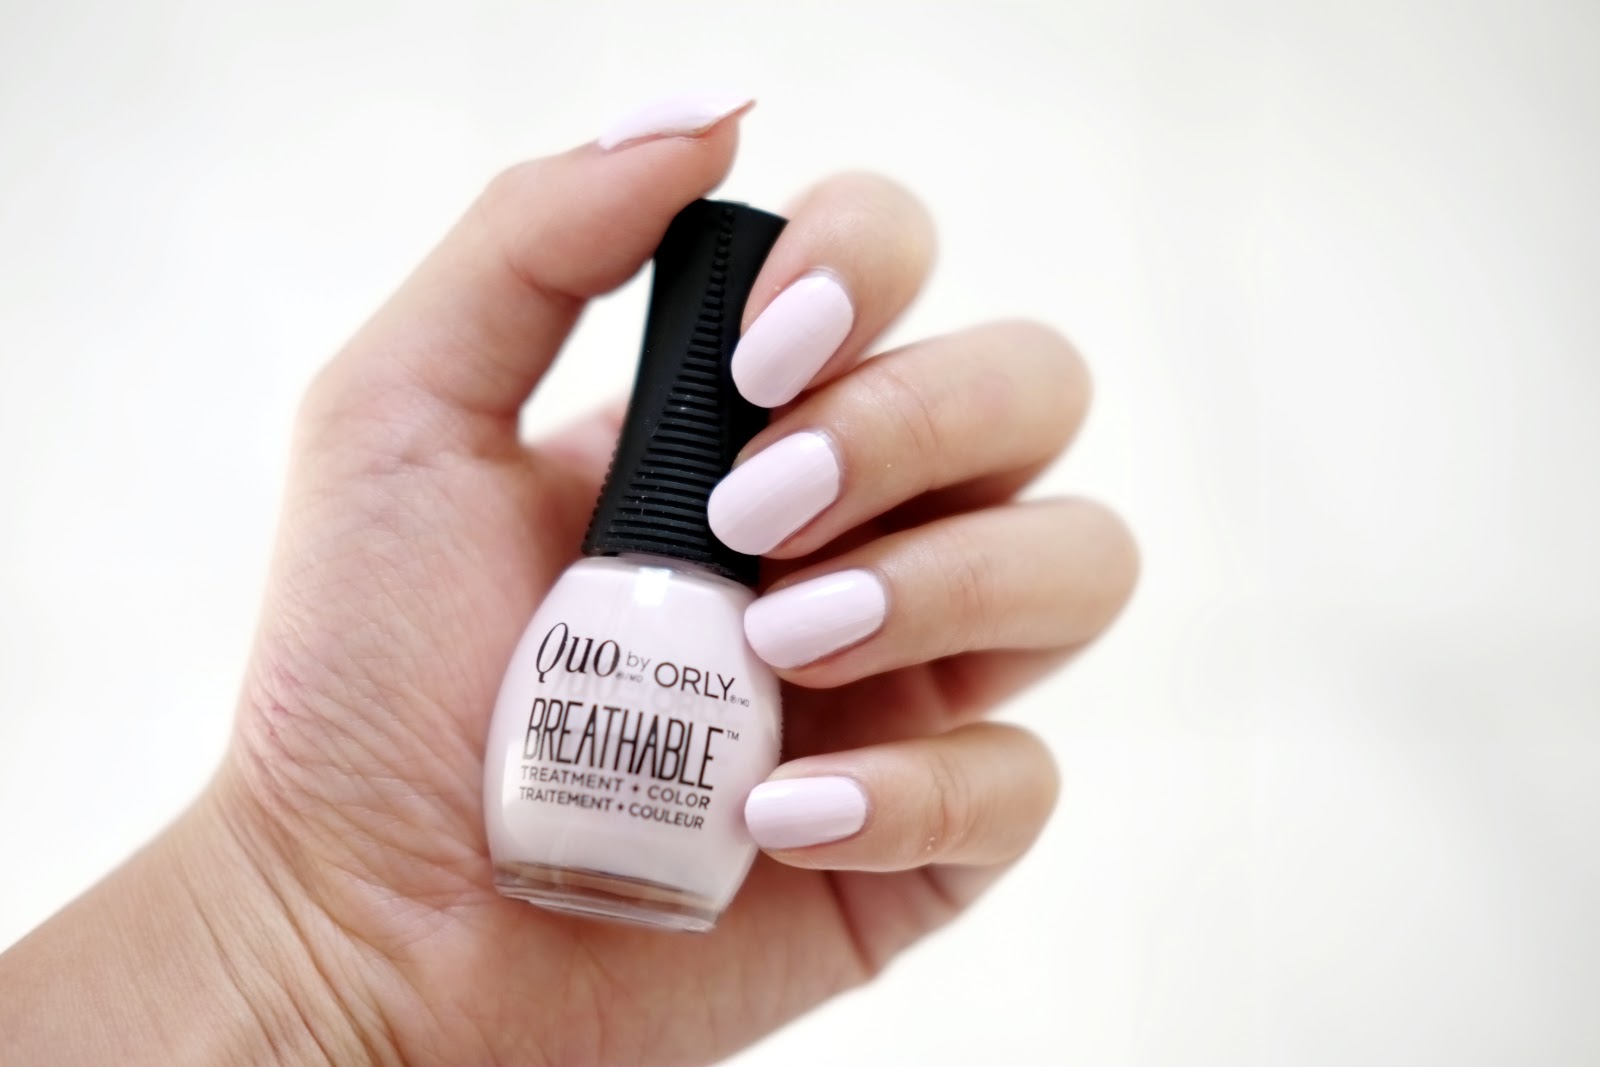 2. Orly Breathable Treatment + Color in "Nude" - wide 9